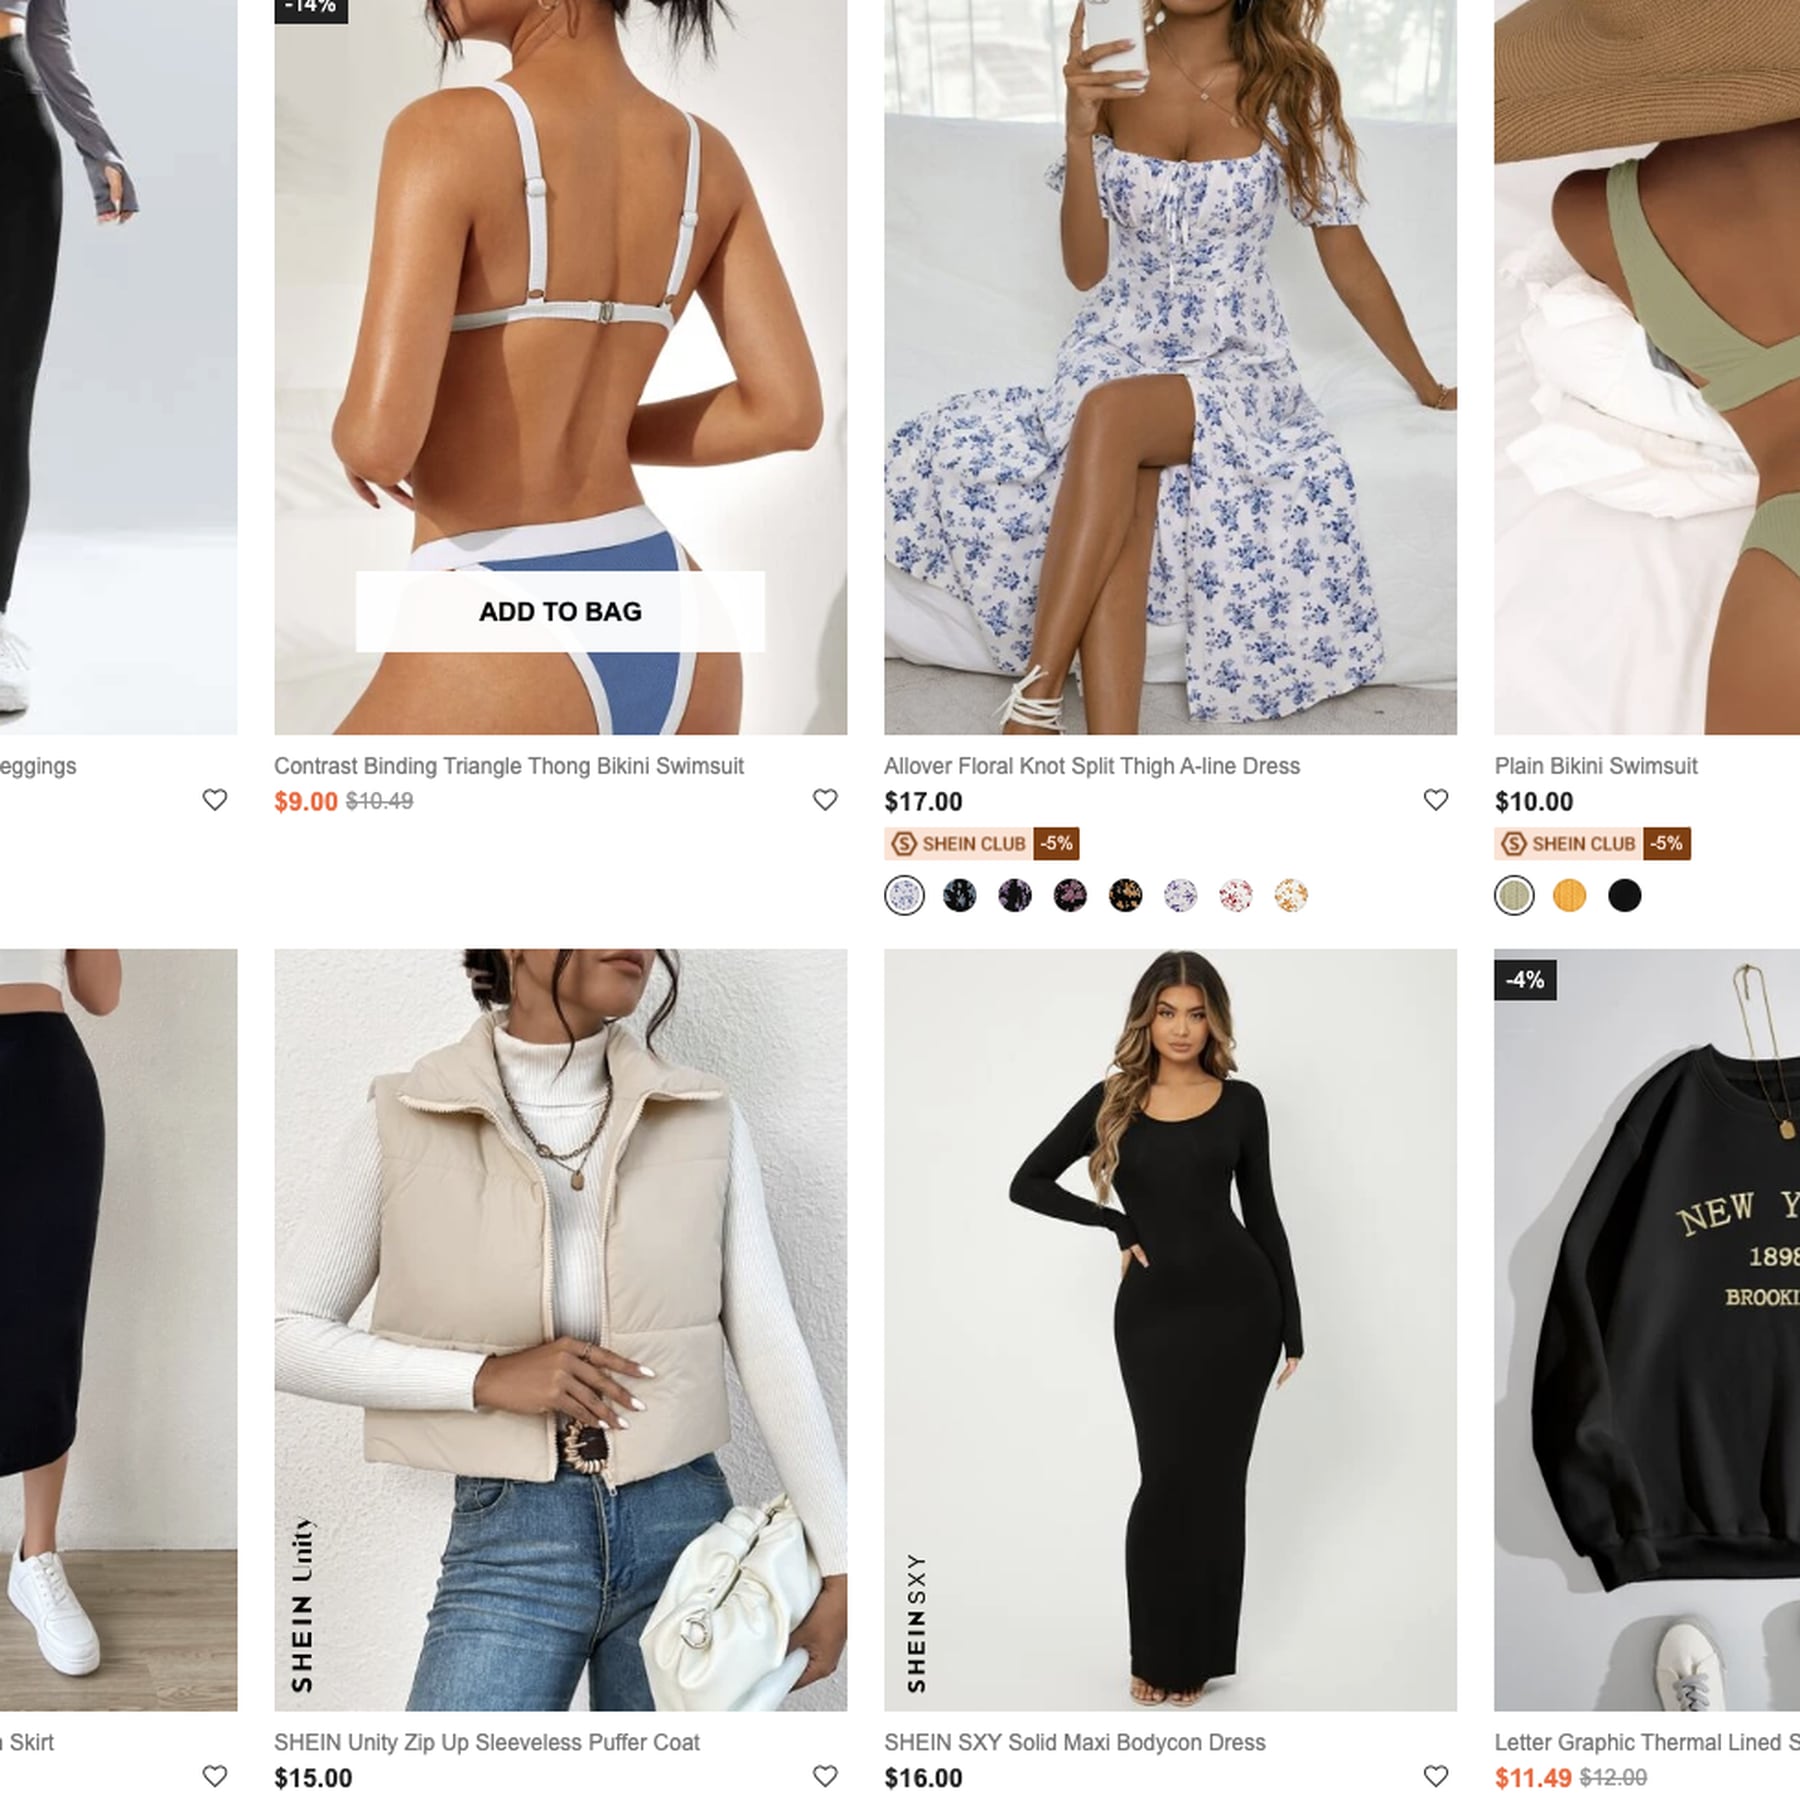 Influencer Under Fire for Shein Brand Trip Ignoring Worker Abuses